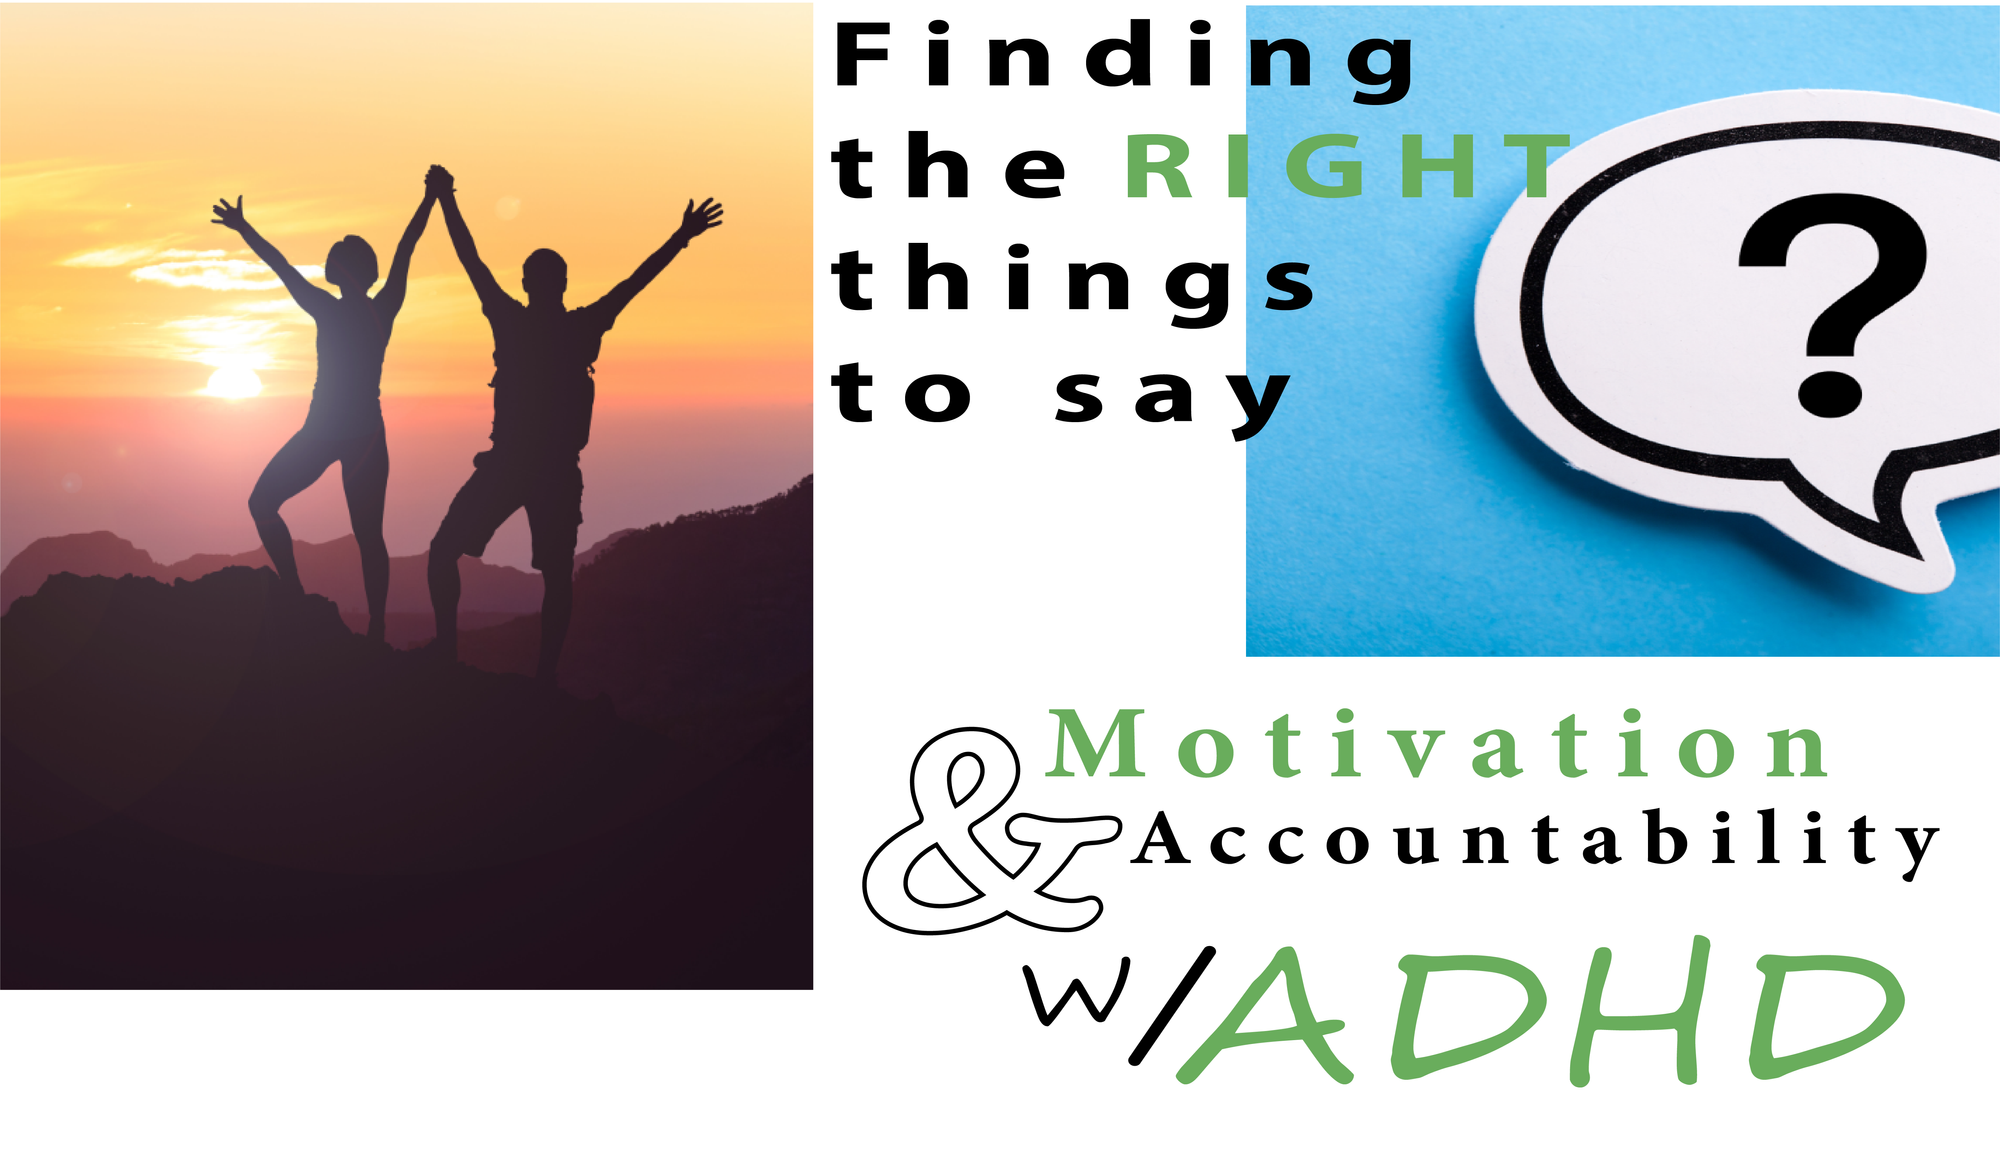 Motivation & Accountability w/ ADHD: Finding The Right Things to Say